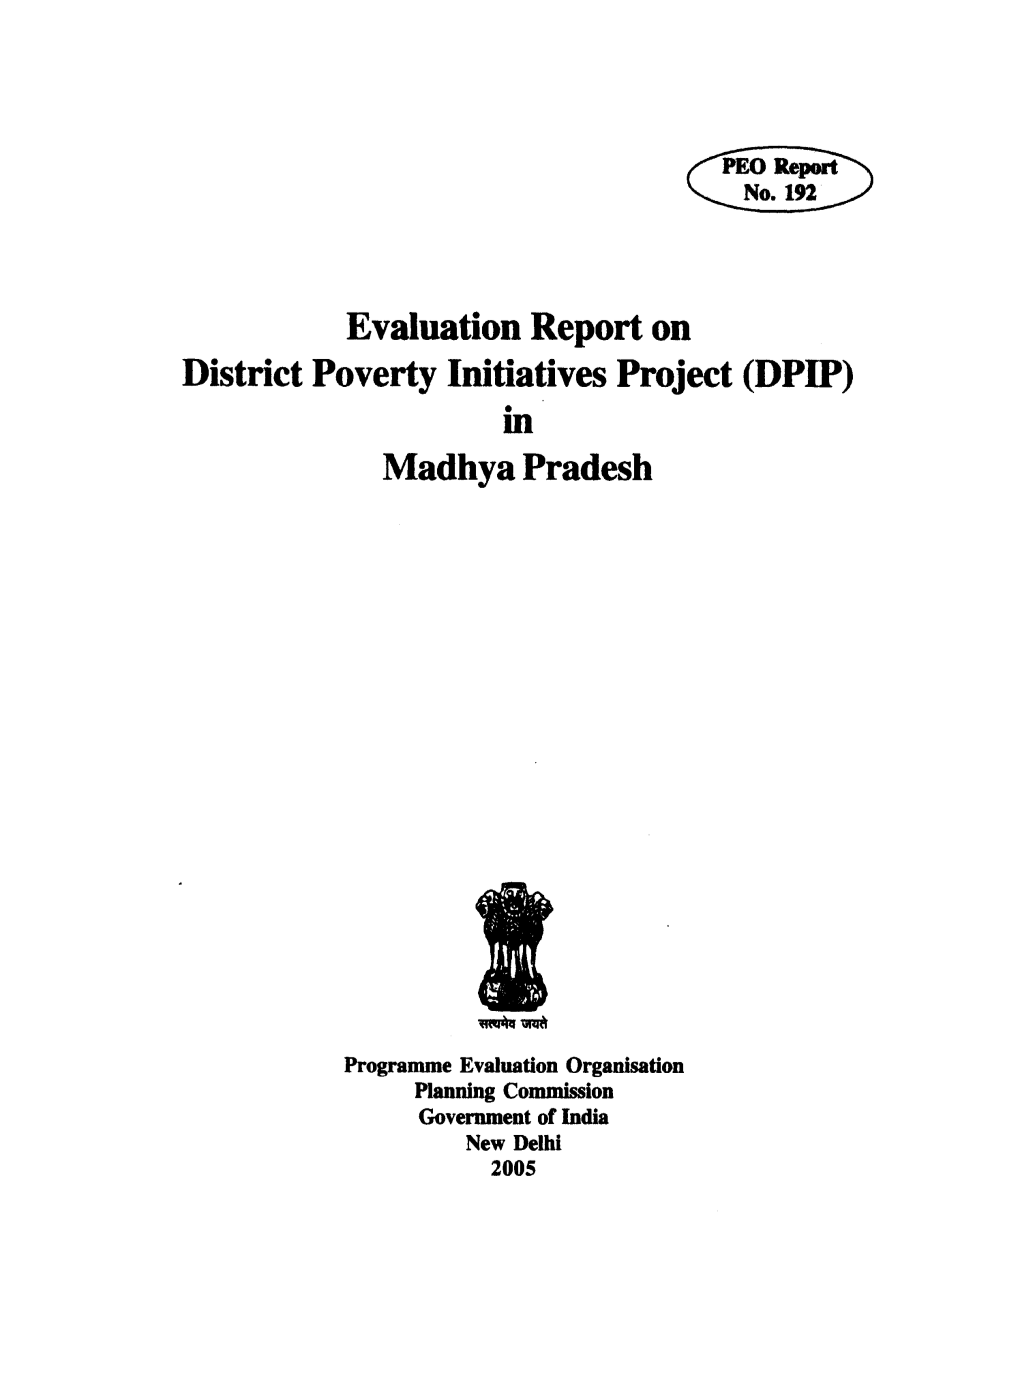 Evaluation Report on District Poverty Initiatives Project (DPIP) in Madhya Pradesh